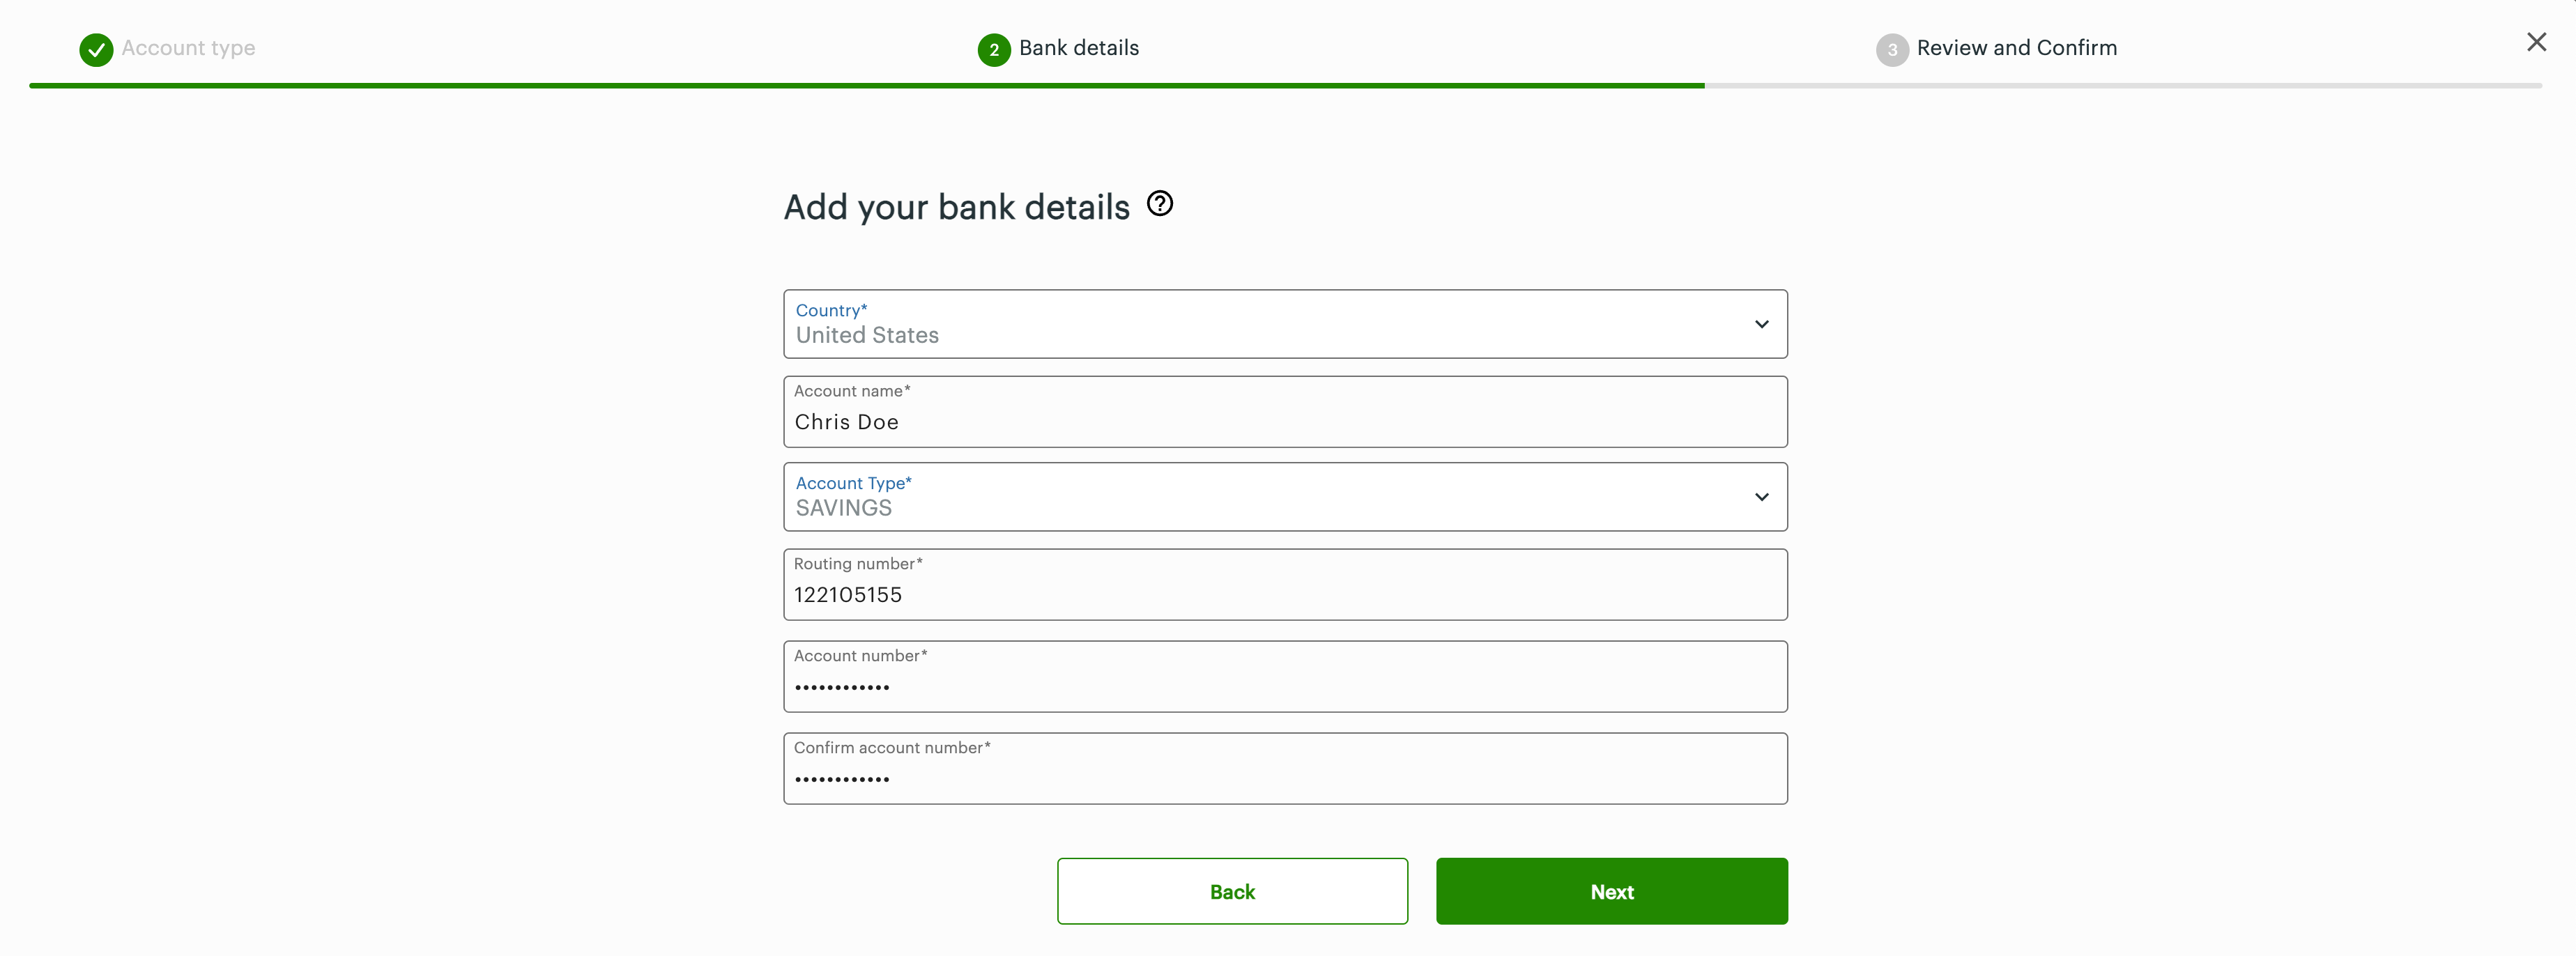 Add your bank details: US or Canada routing number